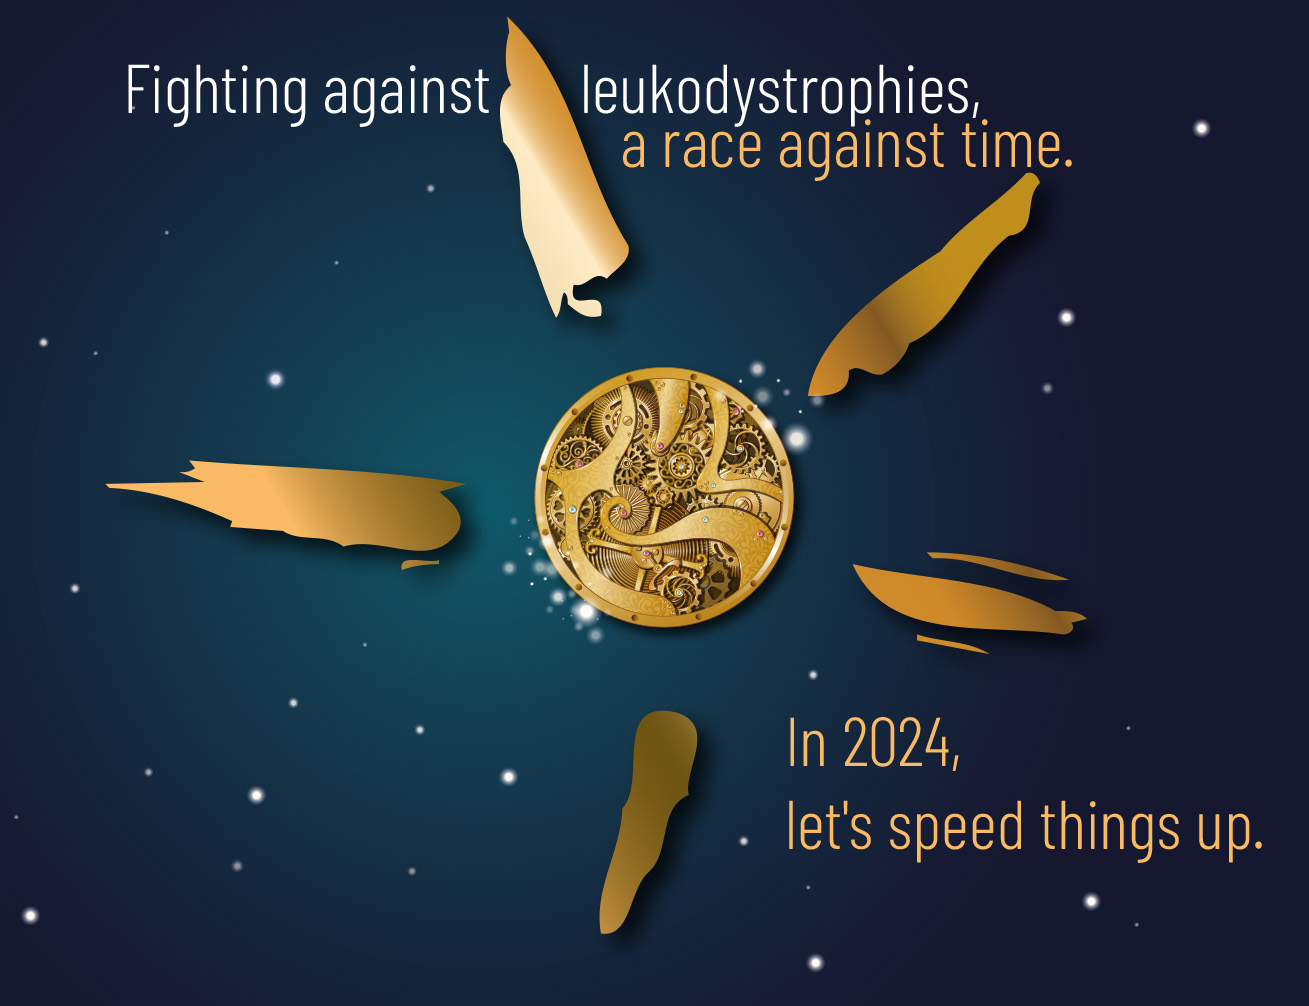 Fighting against leukodystrophies, a race against time. In 2024, let's speed things up.